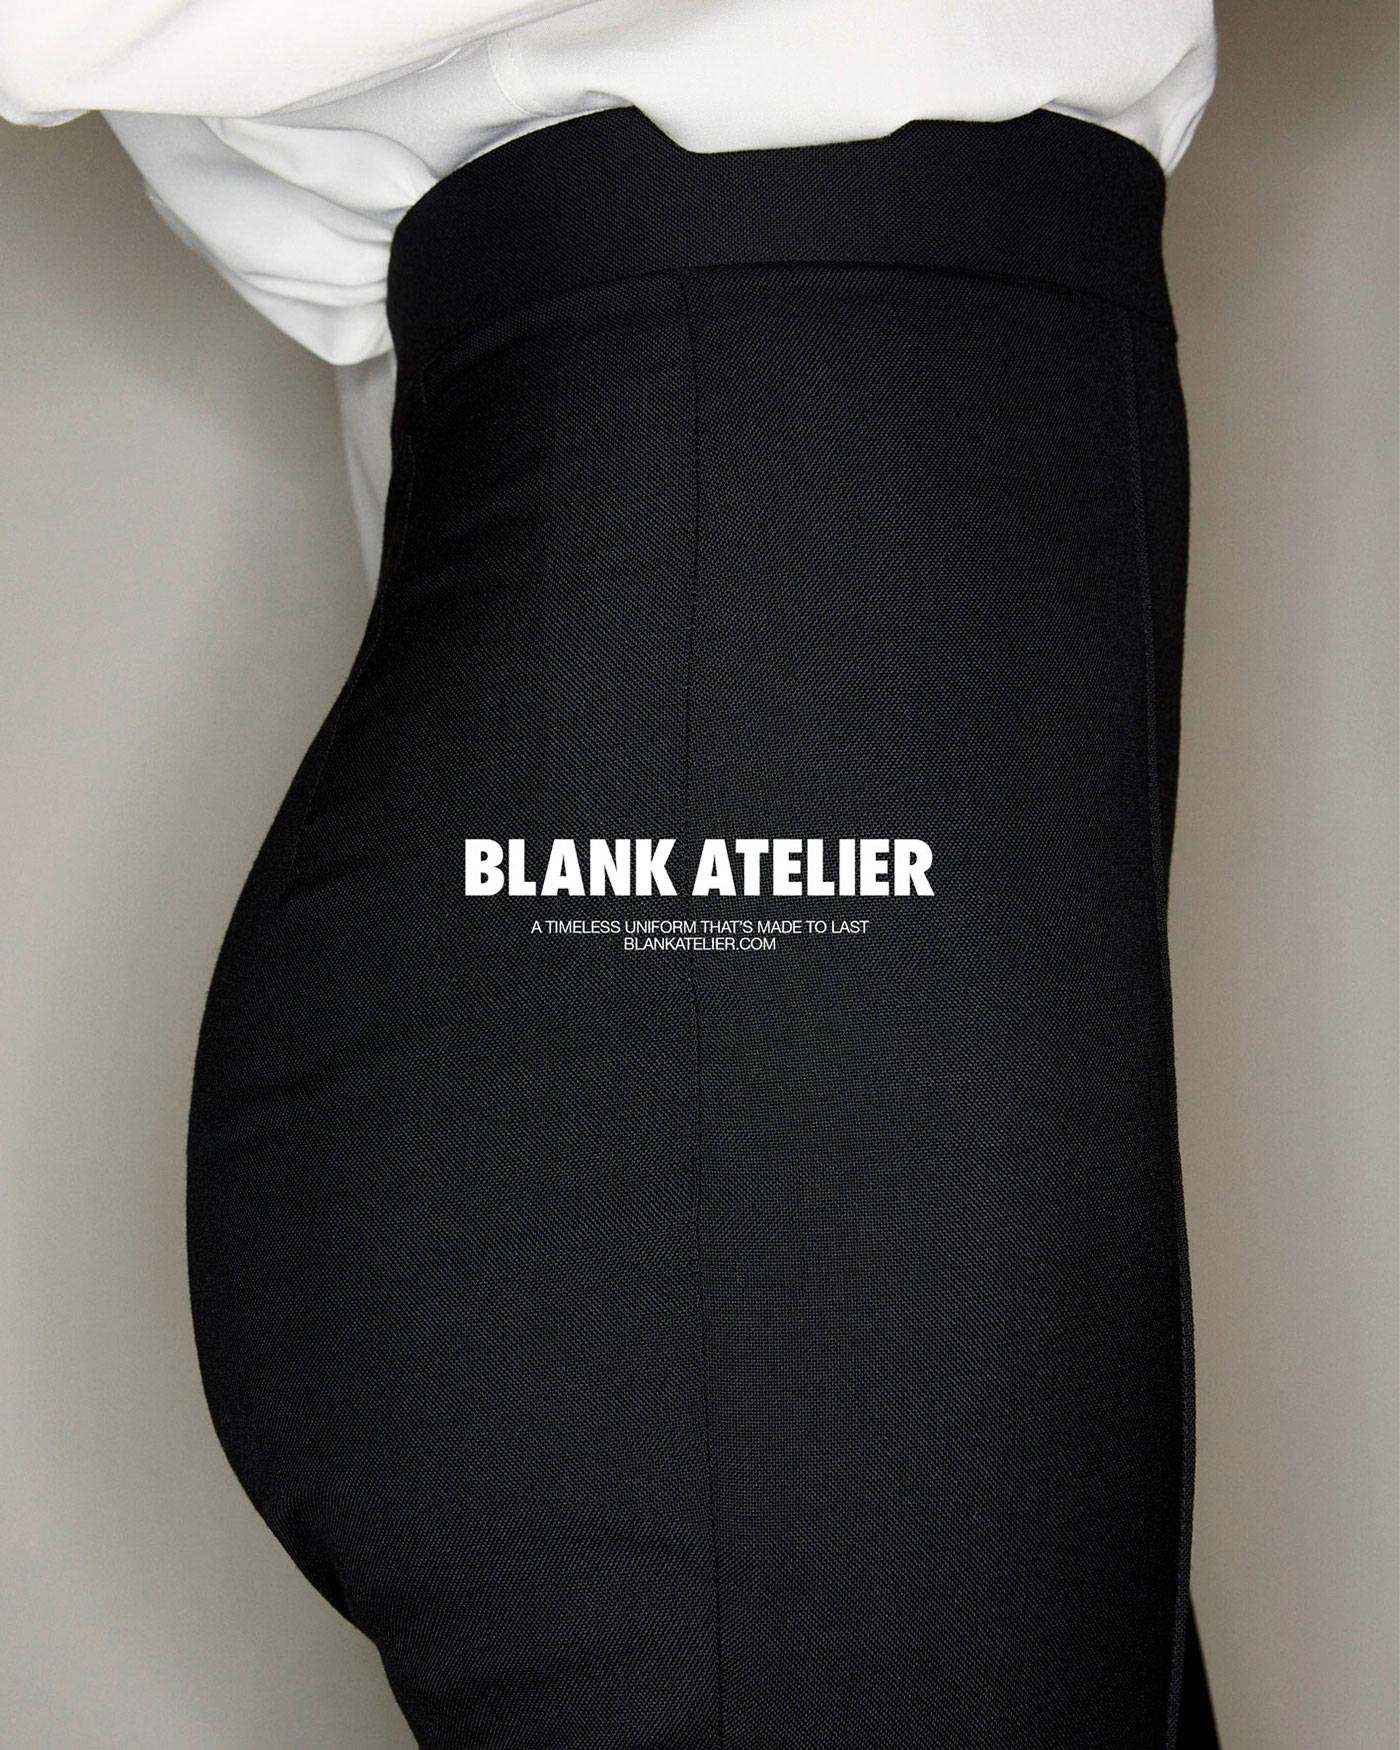 Blank Atelier – Campaign AD